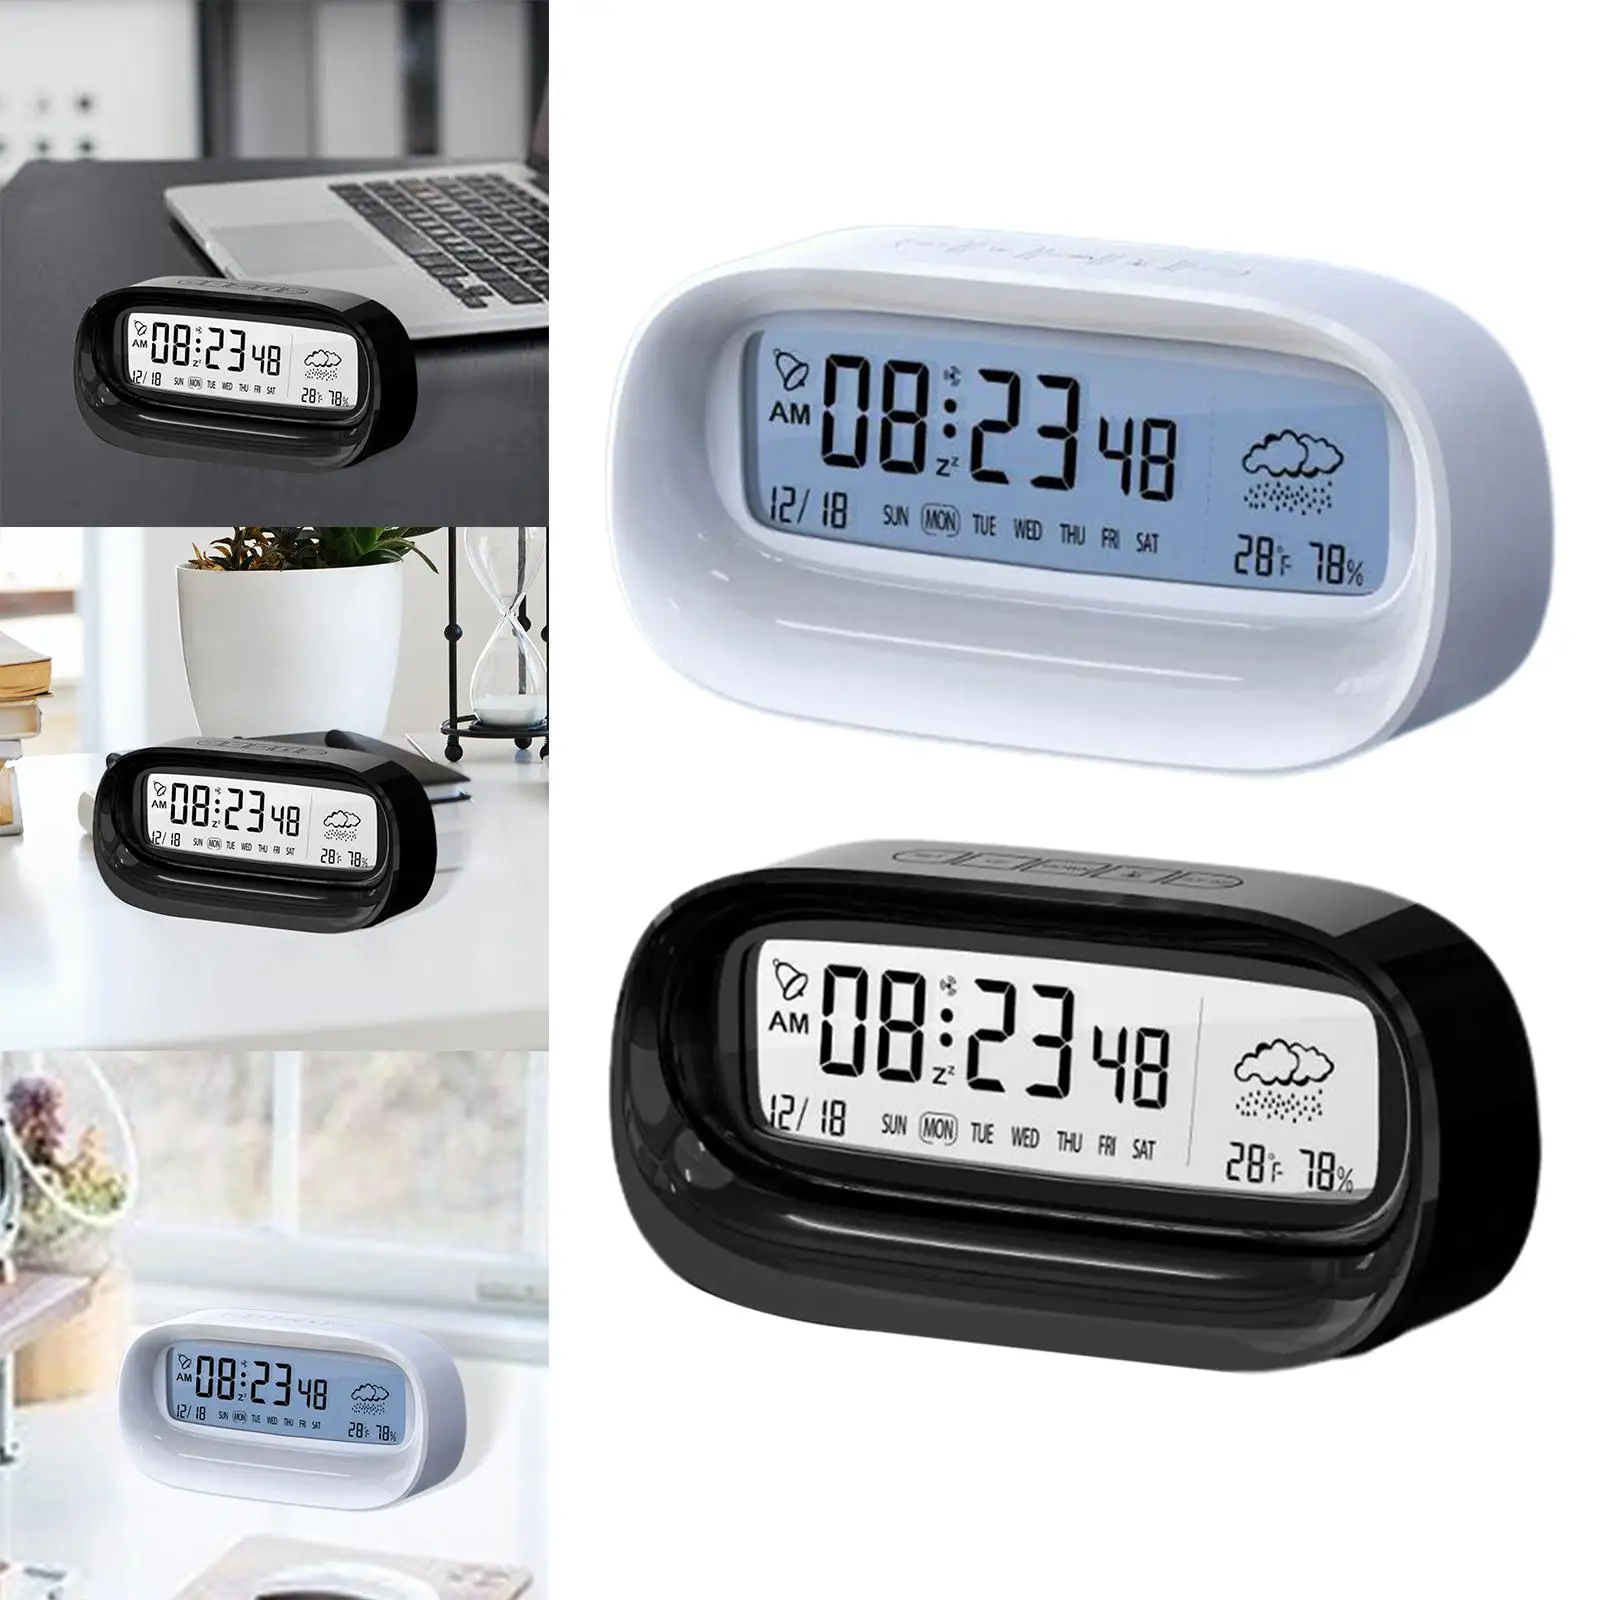 Desk Digital Alarm Clock Large Display with Date, Time and Week with Seconds Weathers Station for Kitchen Bedside Bedroom